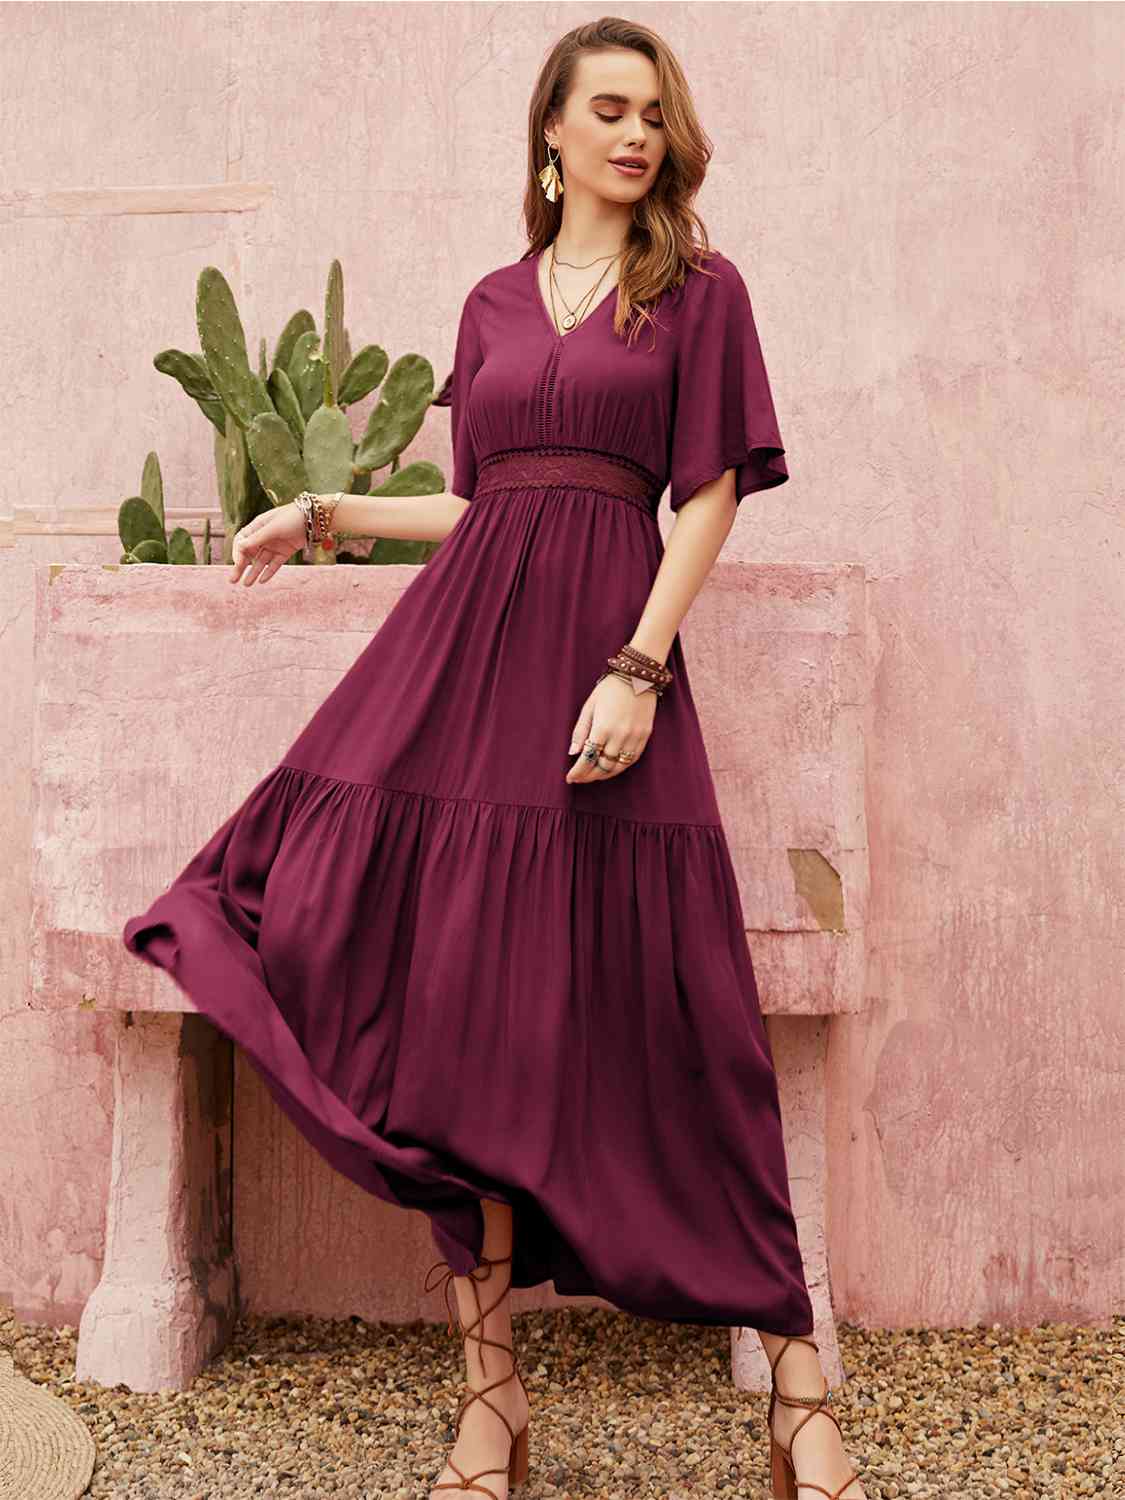 Openwork V-Neck Flare Sleeve Ruched Maxi Dress in CeriseMaxi SkirtBeach Rose Co.